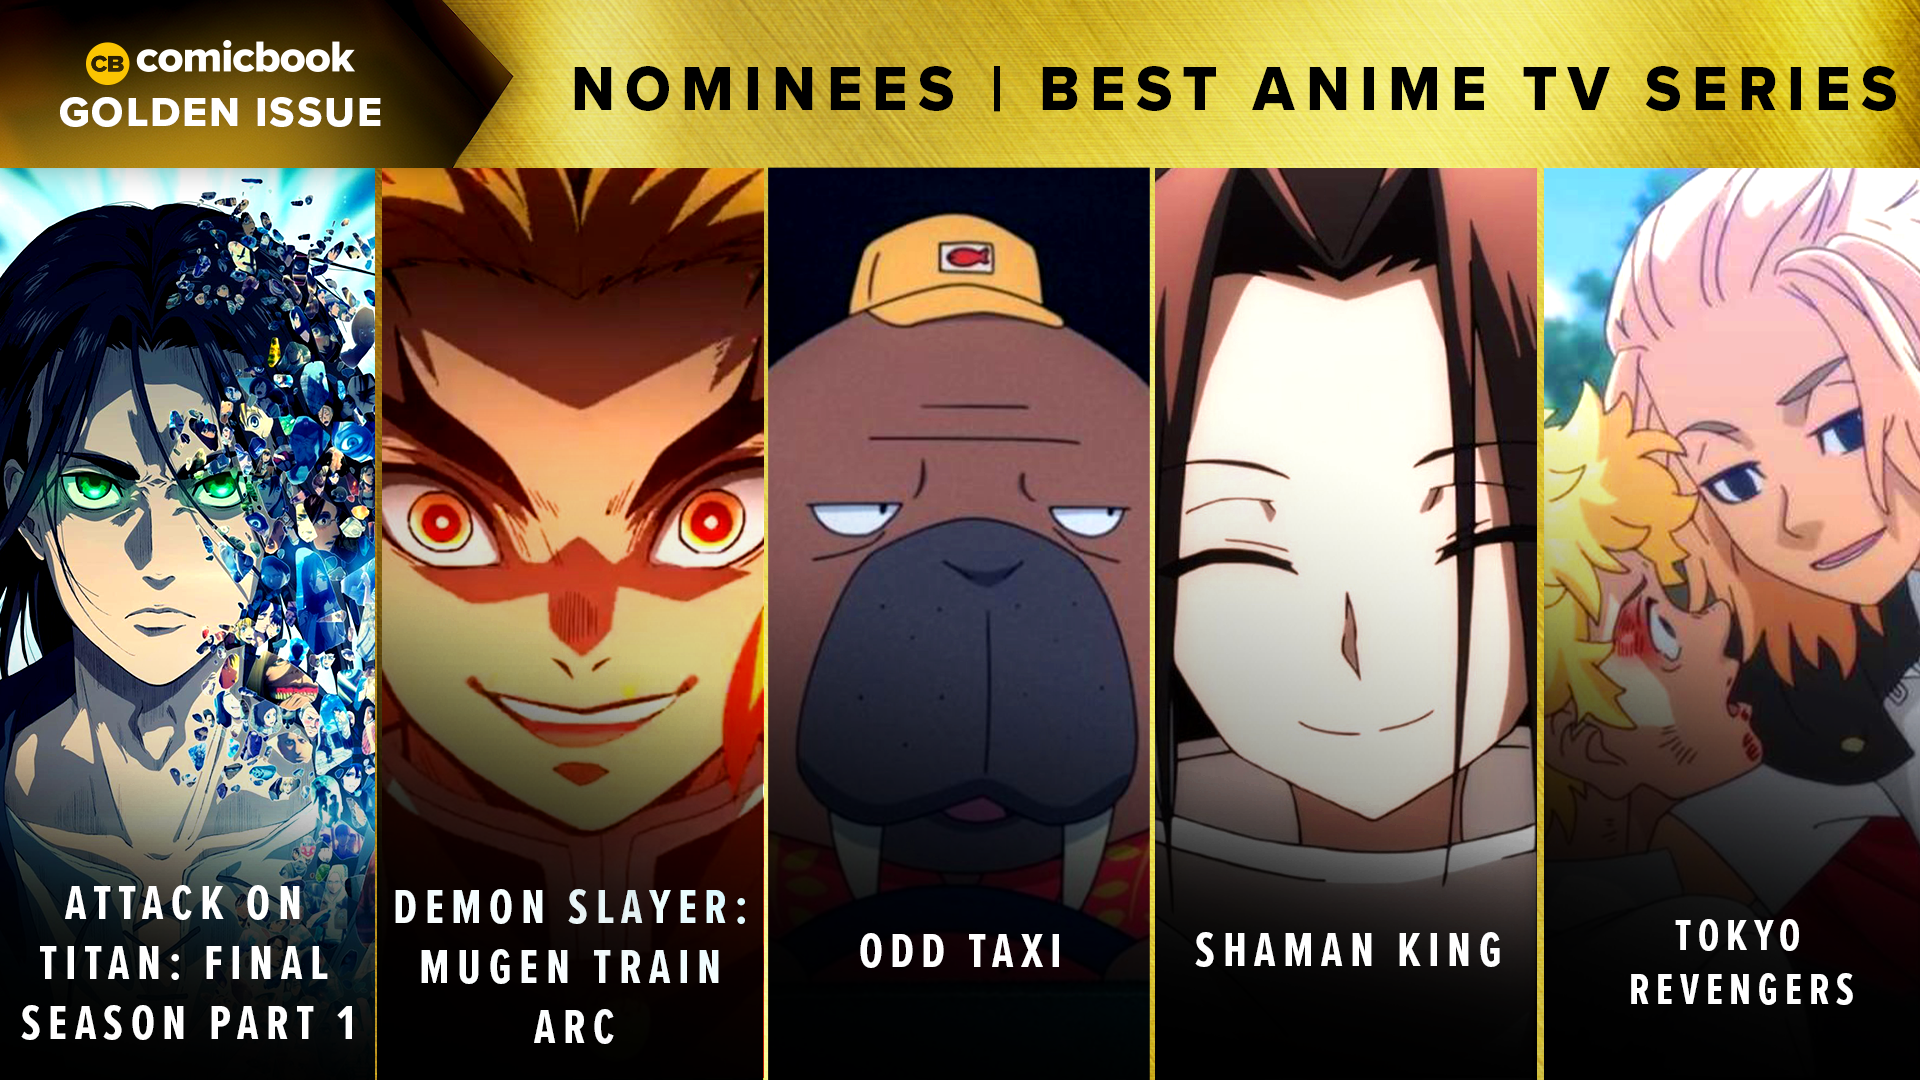 golden-issues-2021-nominees-best-anime-tv-series.png